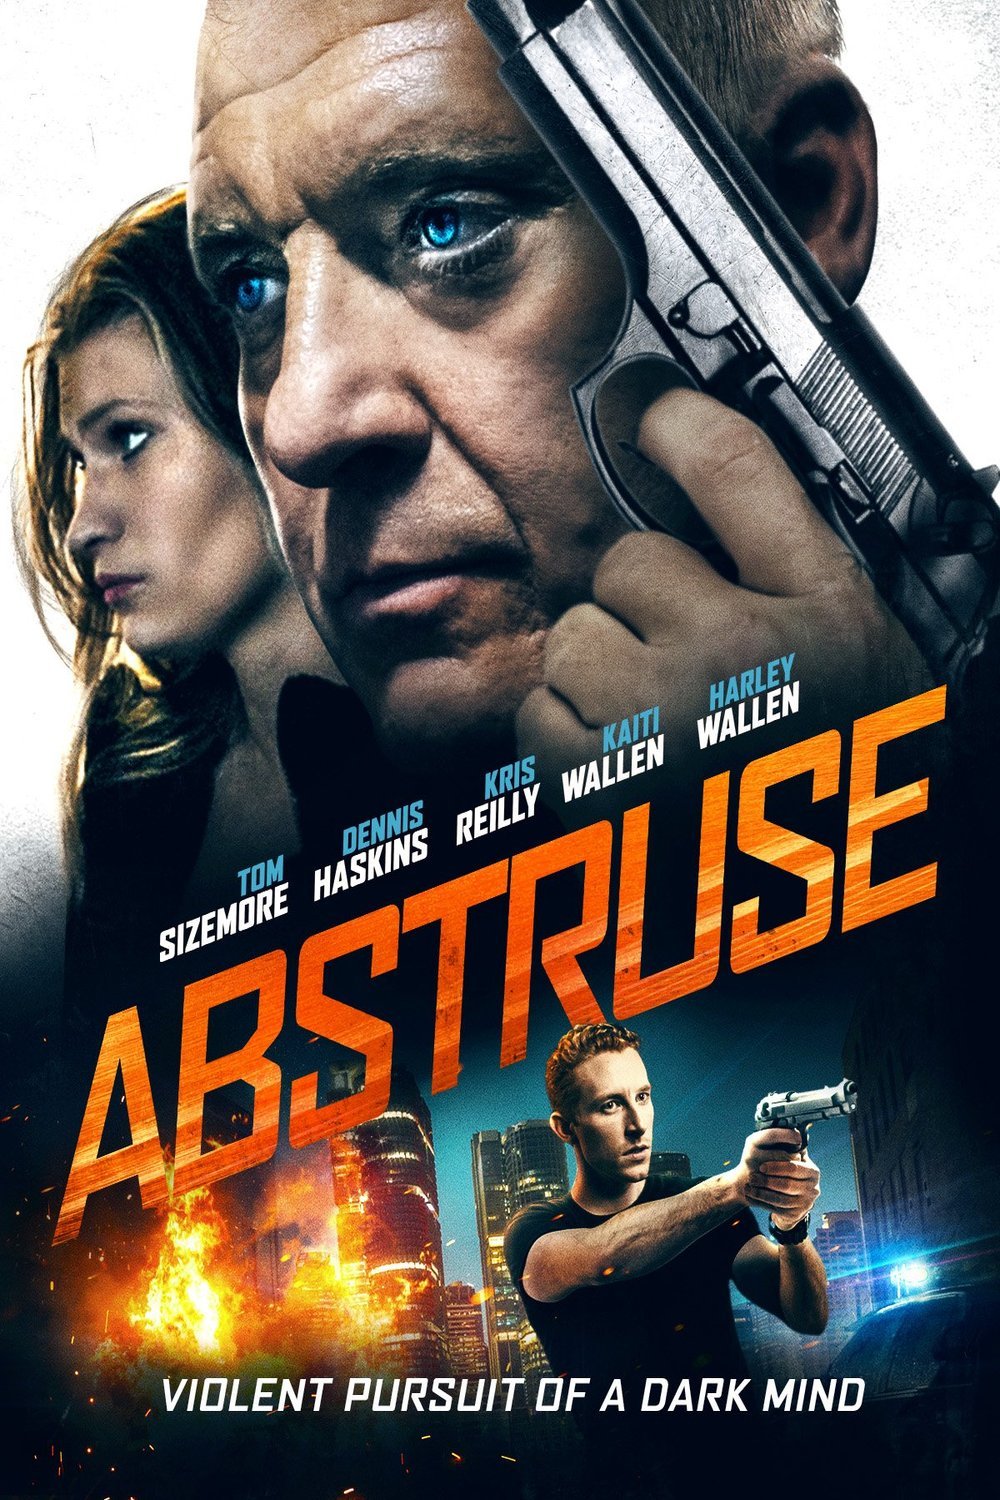 Poster of the movie Abstruse